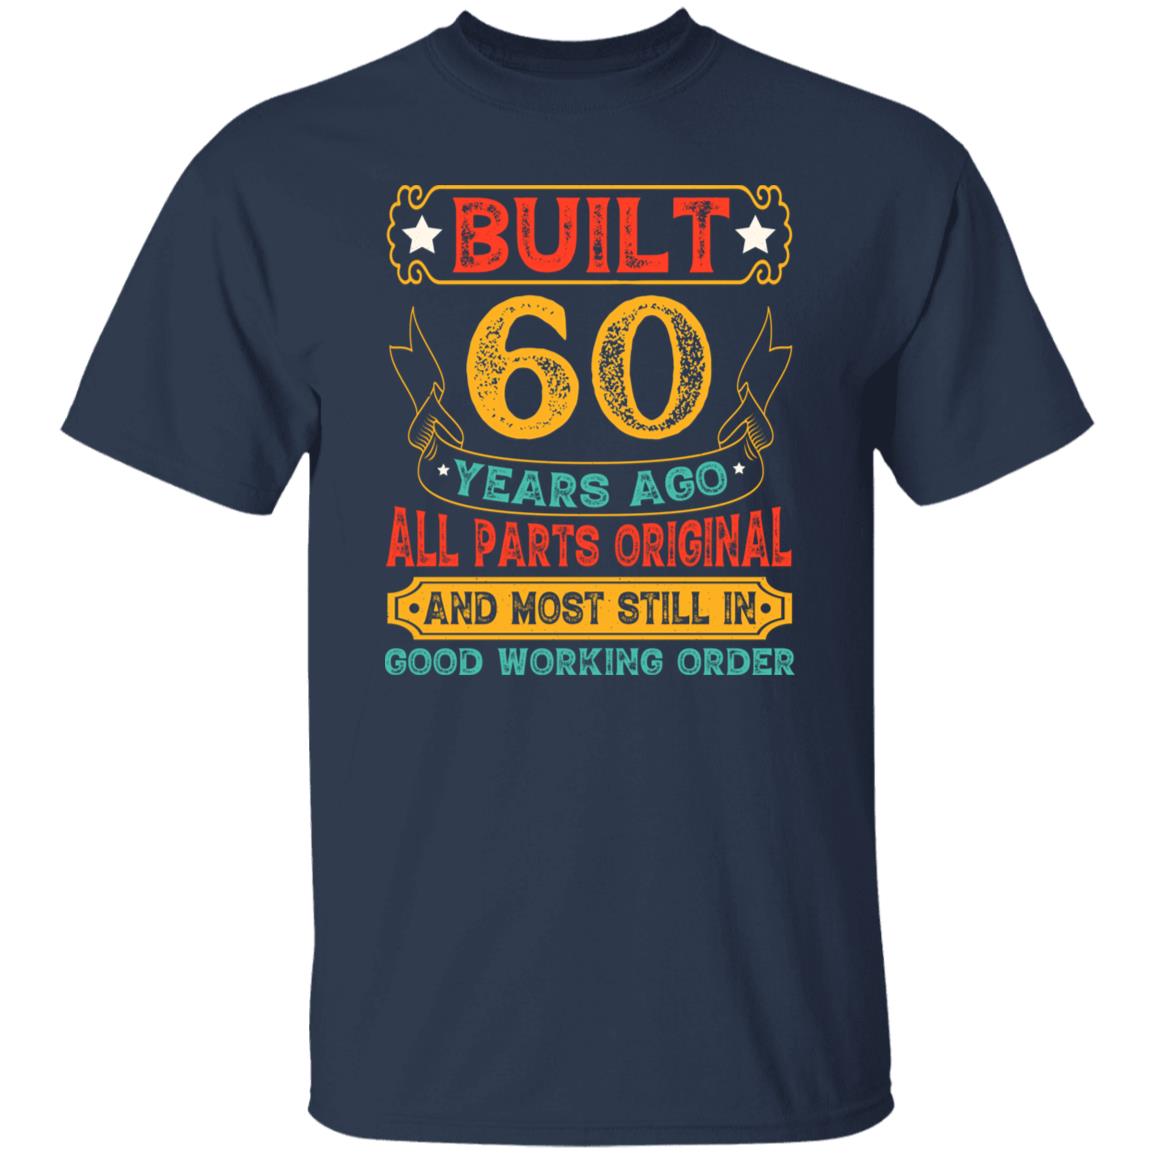 Personalized Birthday Gift - Built Years Ago All Parts Original Funny Shirt